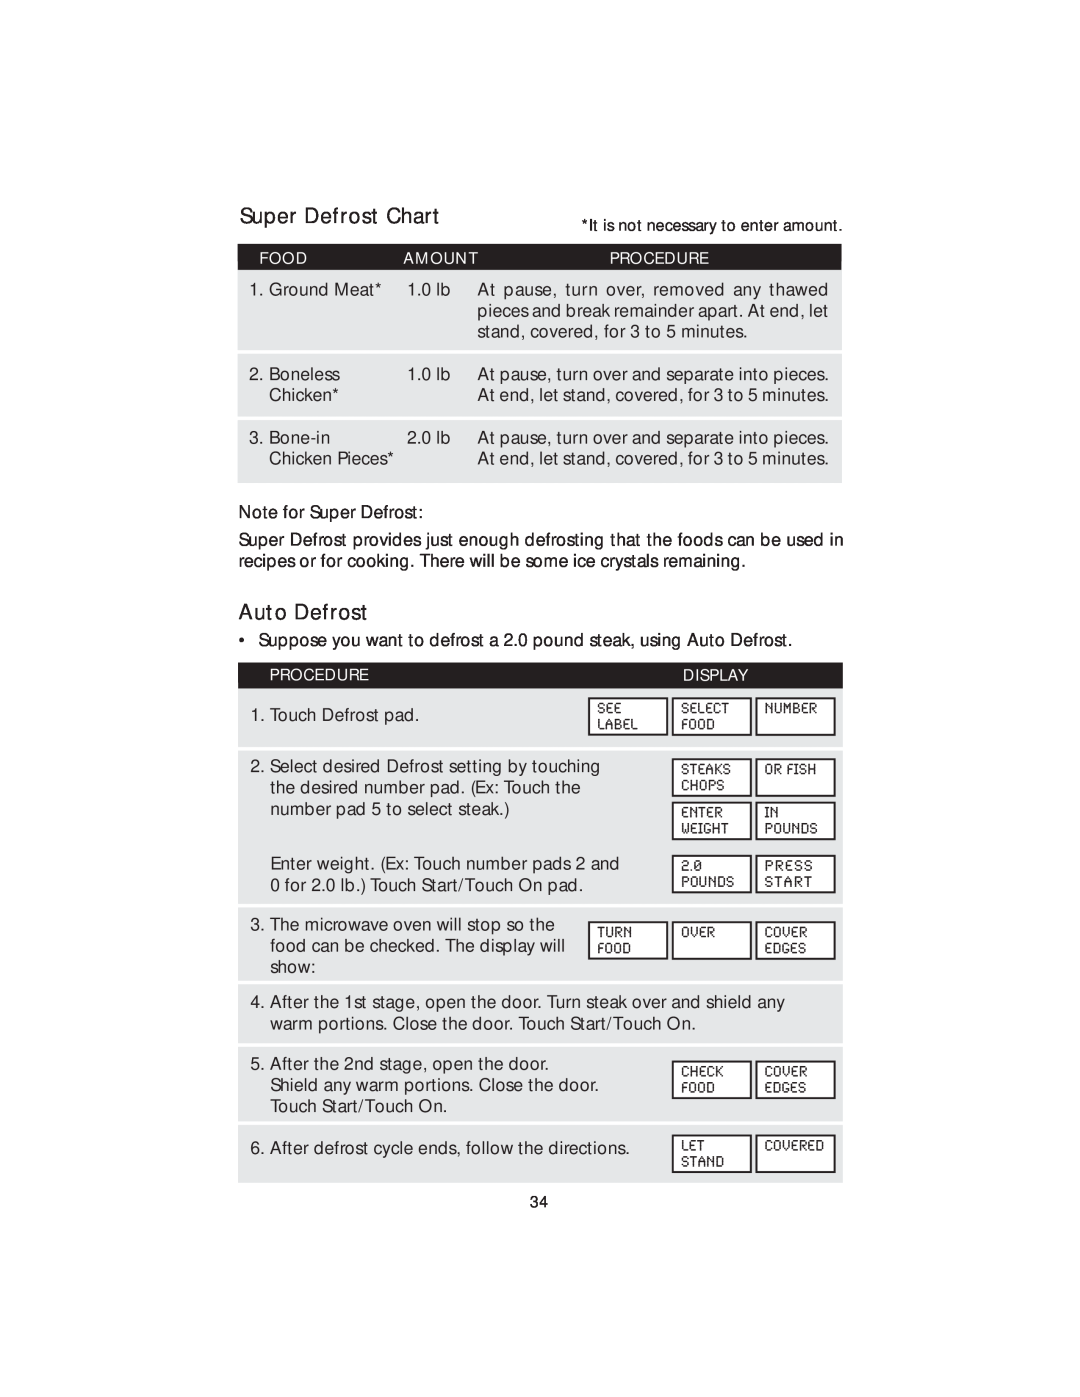 Viking DMOS200SS manual Super Defrost Chart, Auto Defrost, Enter Weight 